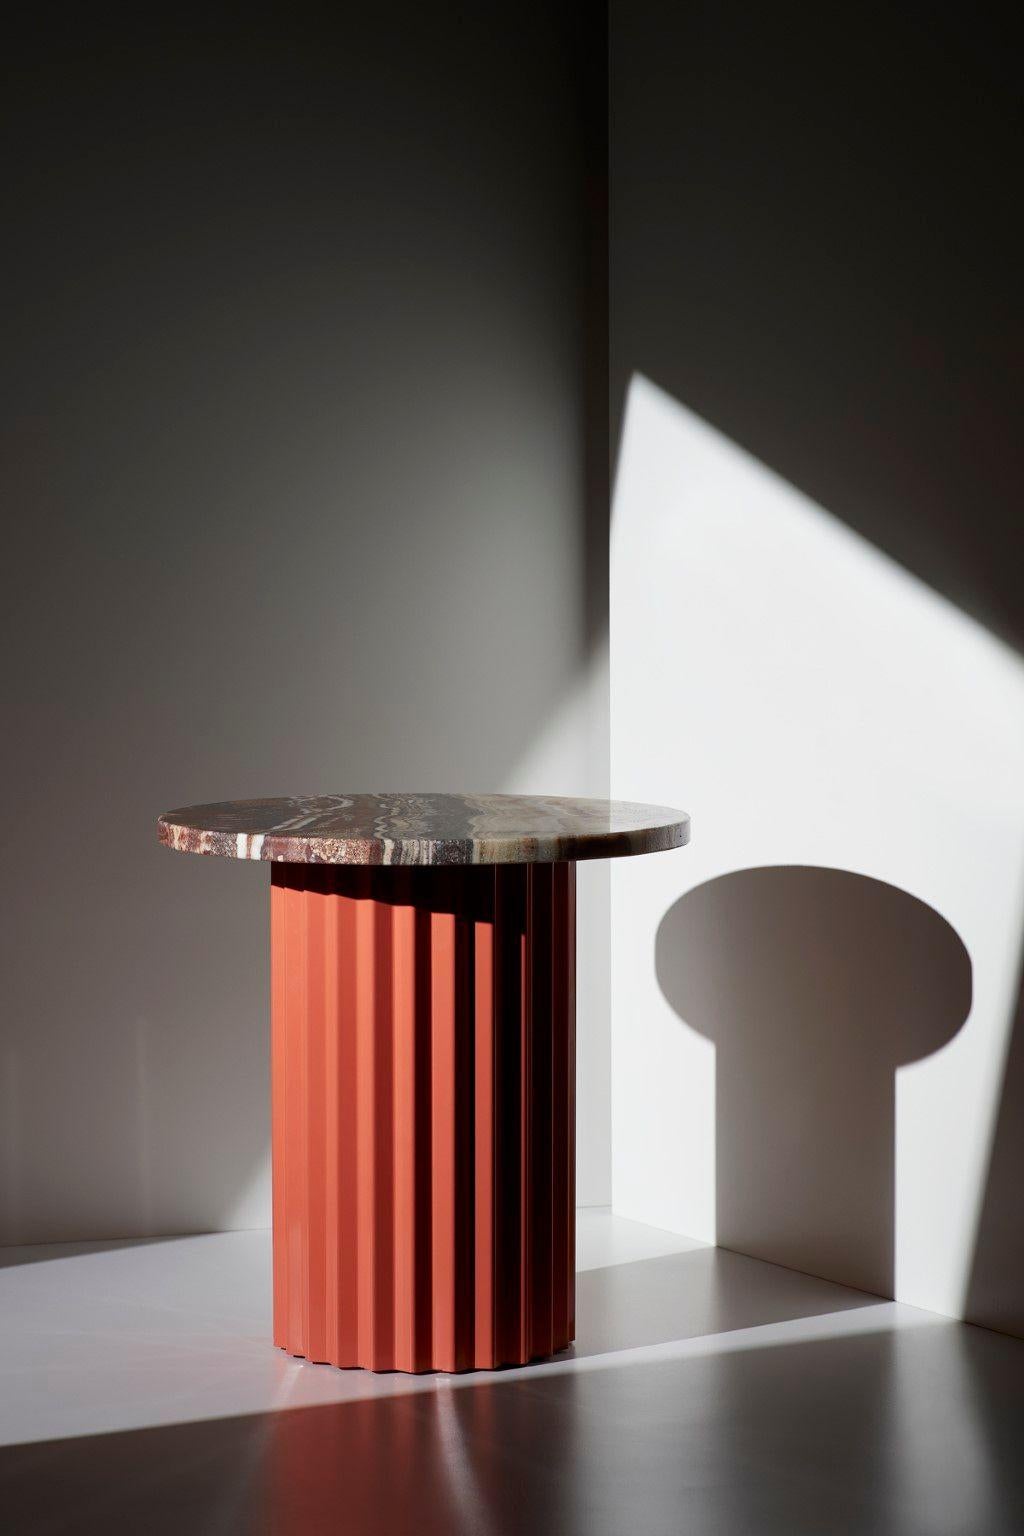 Column lounge table with Marble 40 by Lisette Rützou.
Dimensions: D 40 x H 41 cm
Materials: Marble, Onyx
Also available in Ø 60.

2Lisette Rützou’s design is motivated by an urge to articulate a story. Inspired by the beauty of materials, form